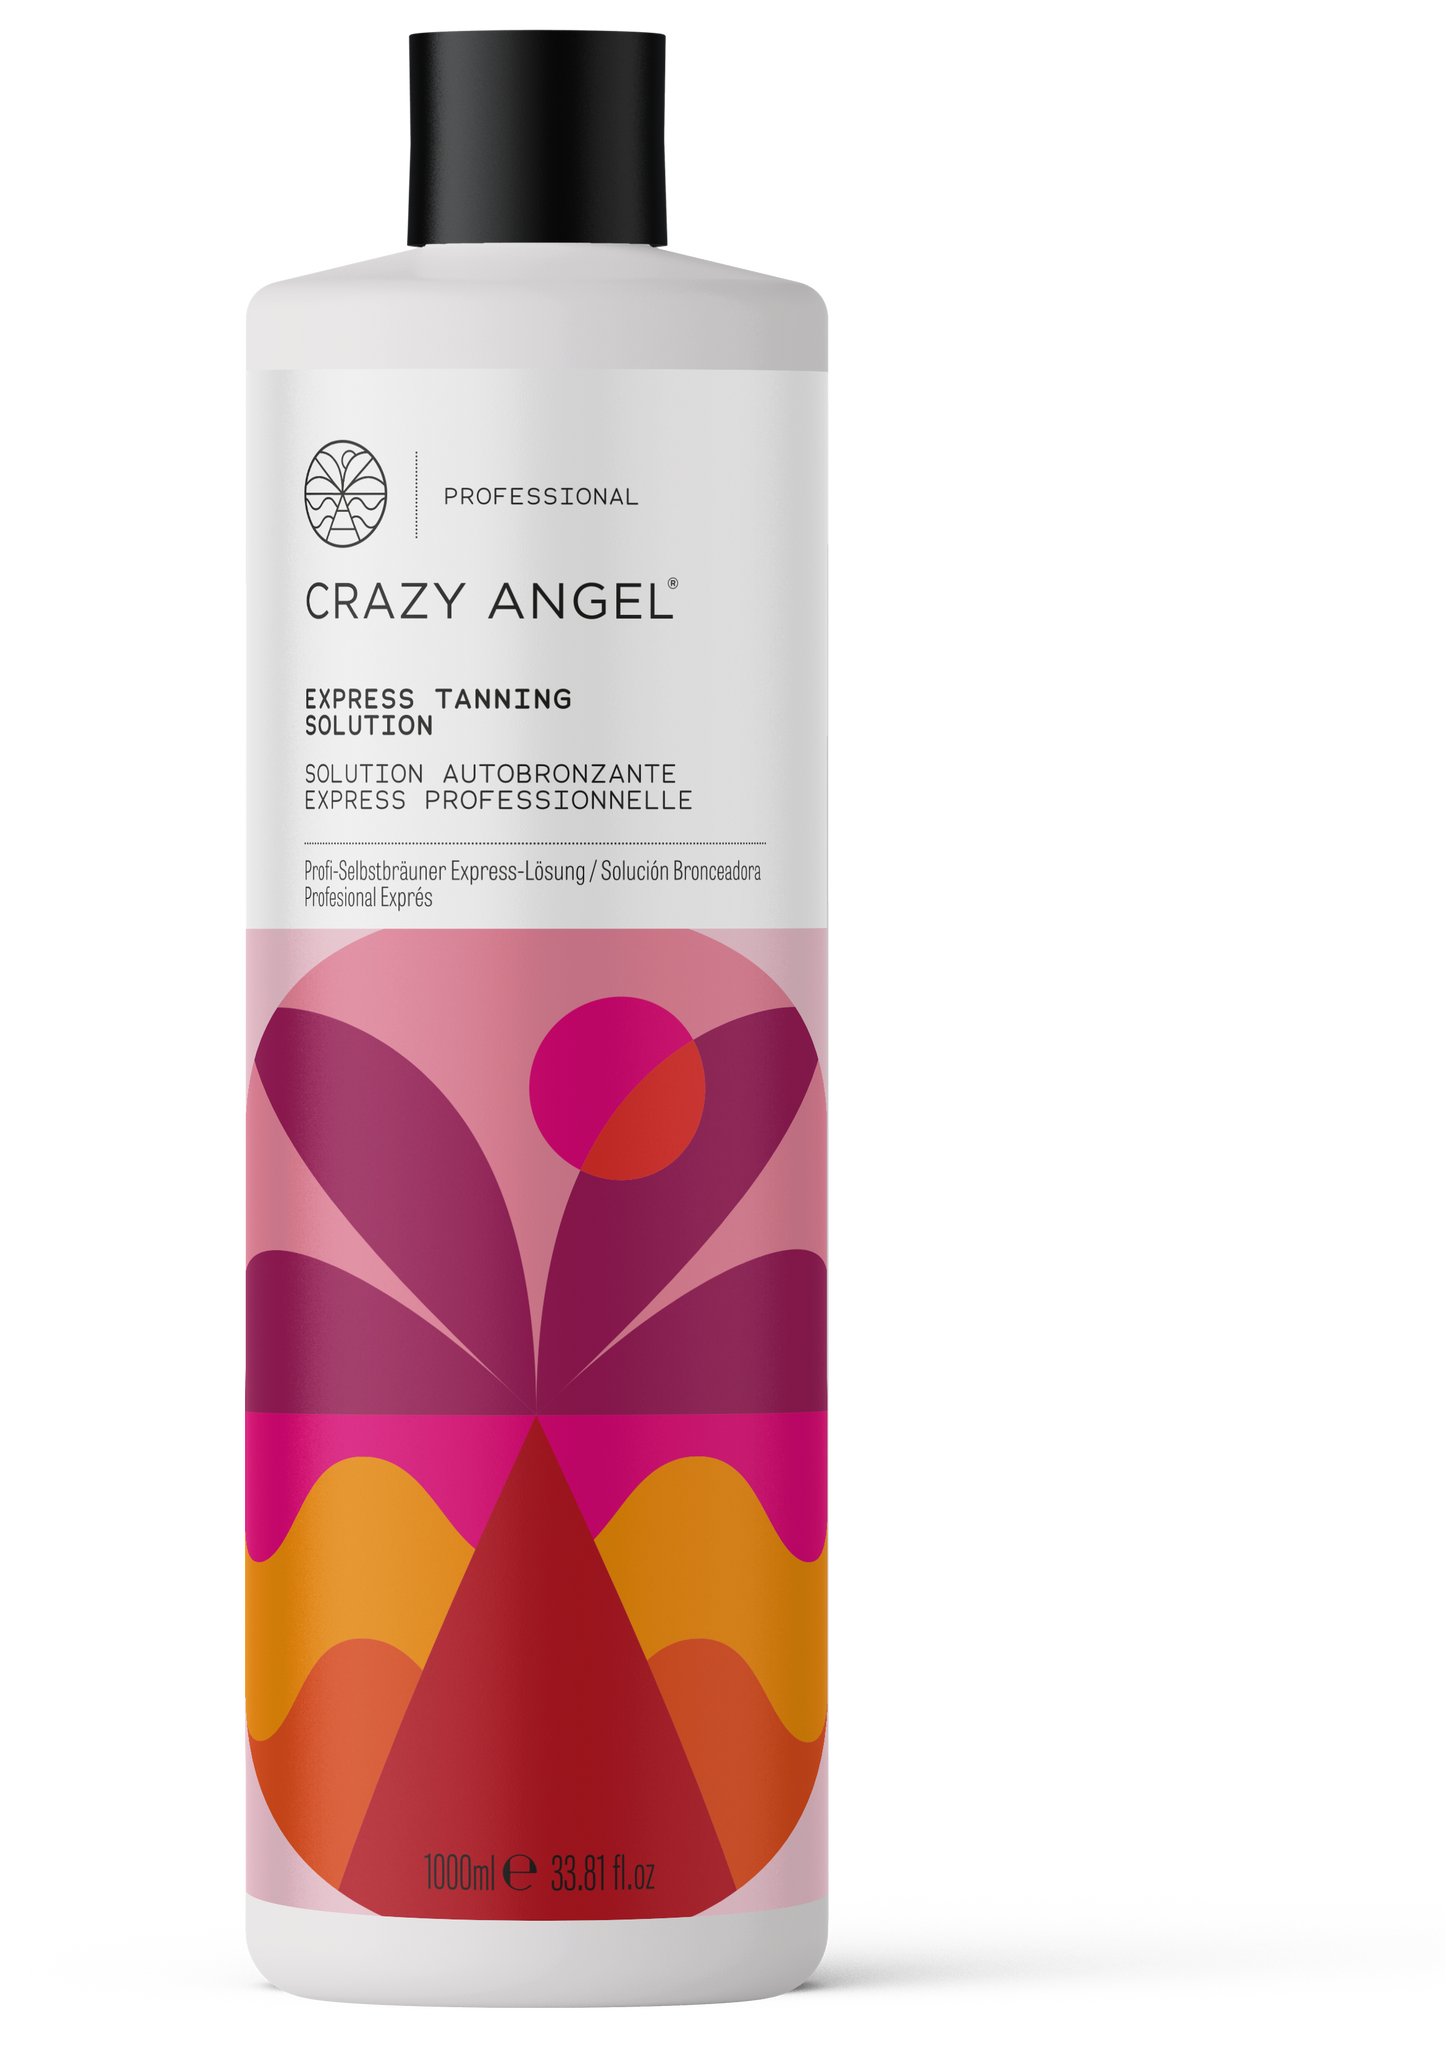 Crazy Angel Express Tanning Solution